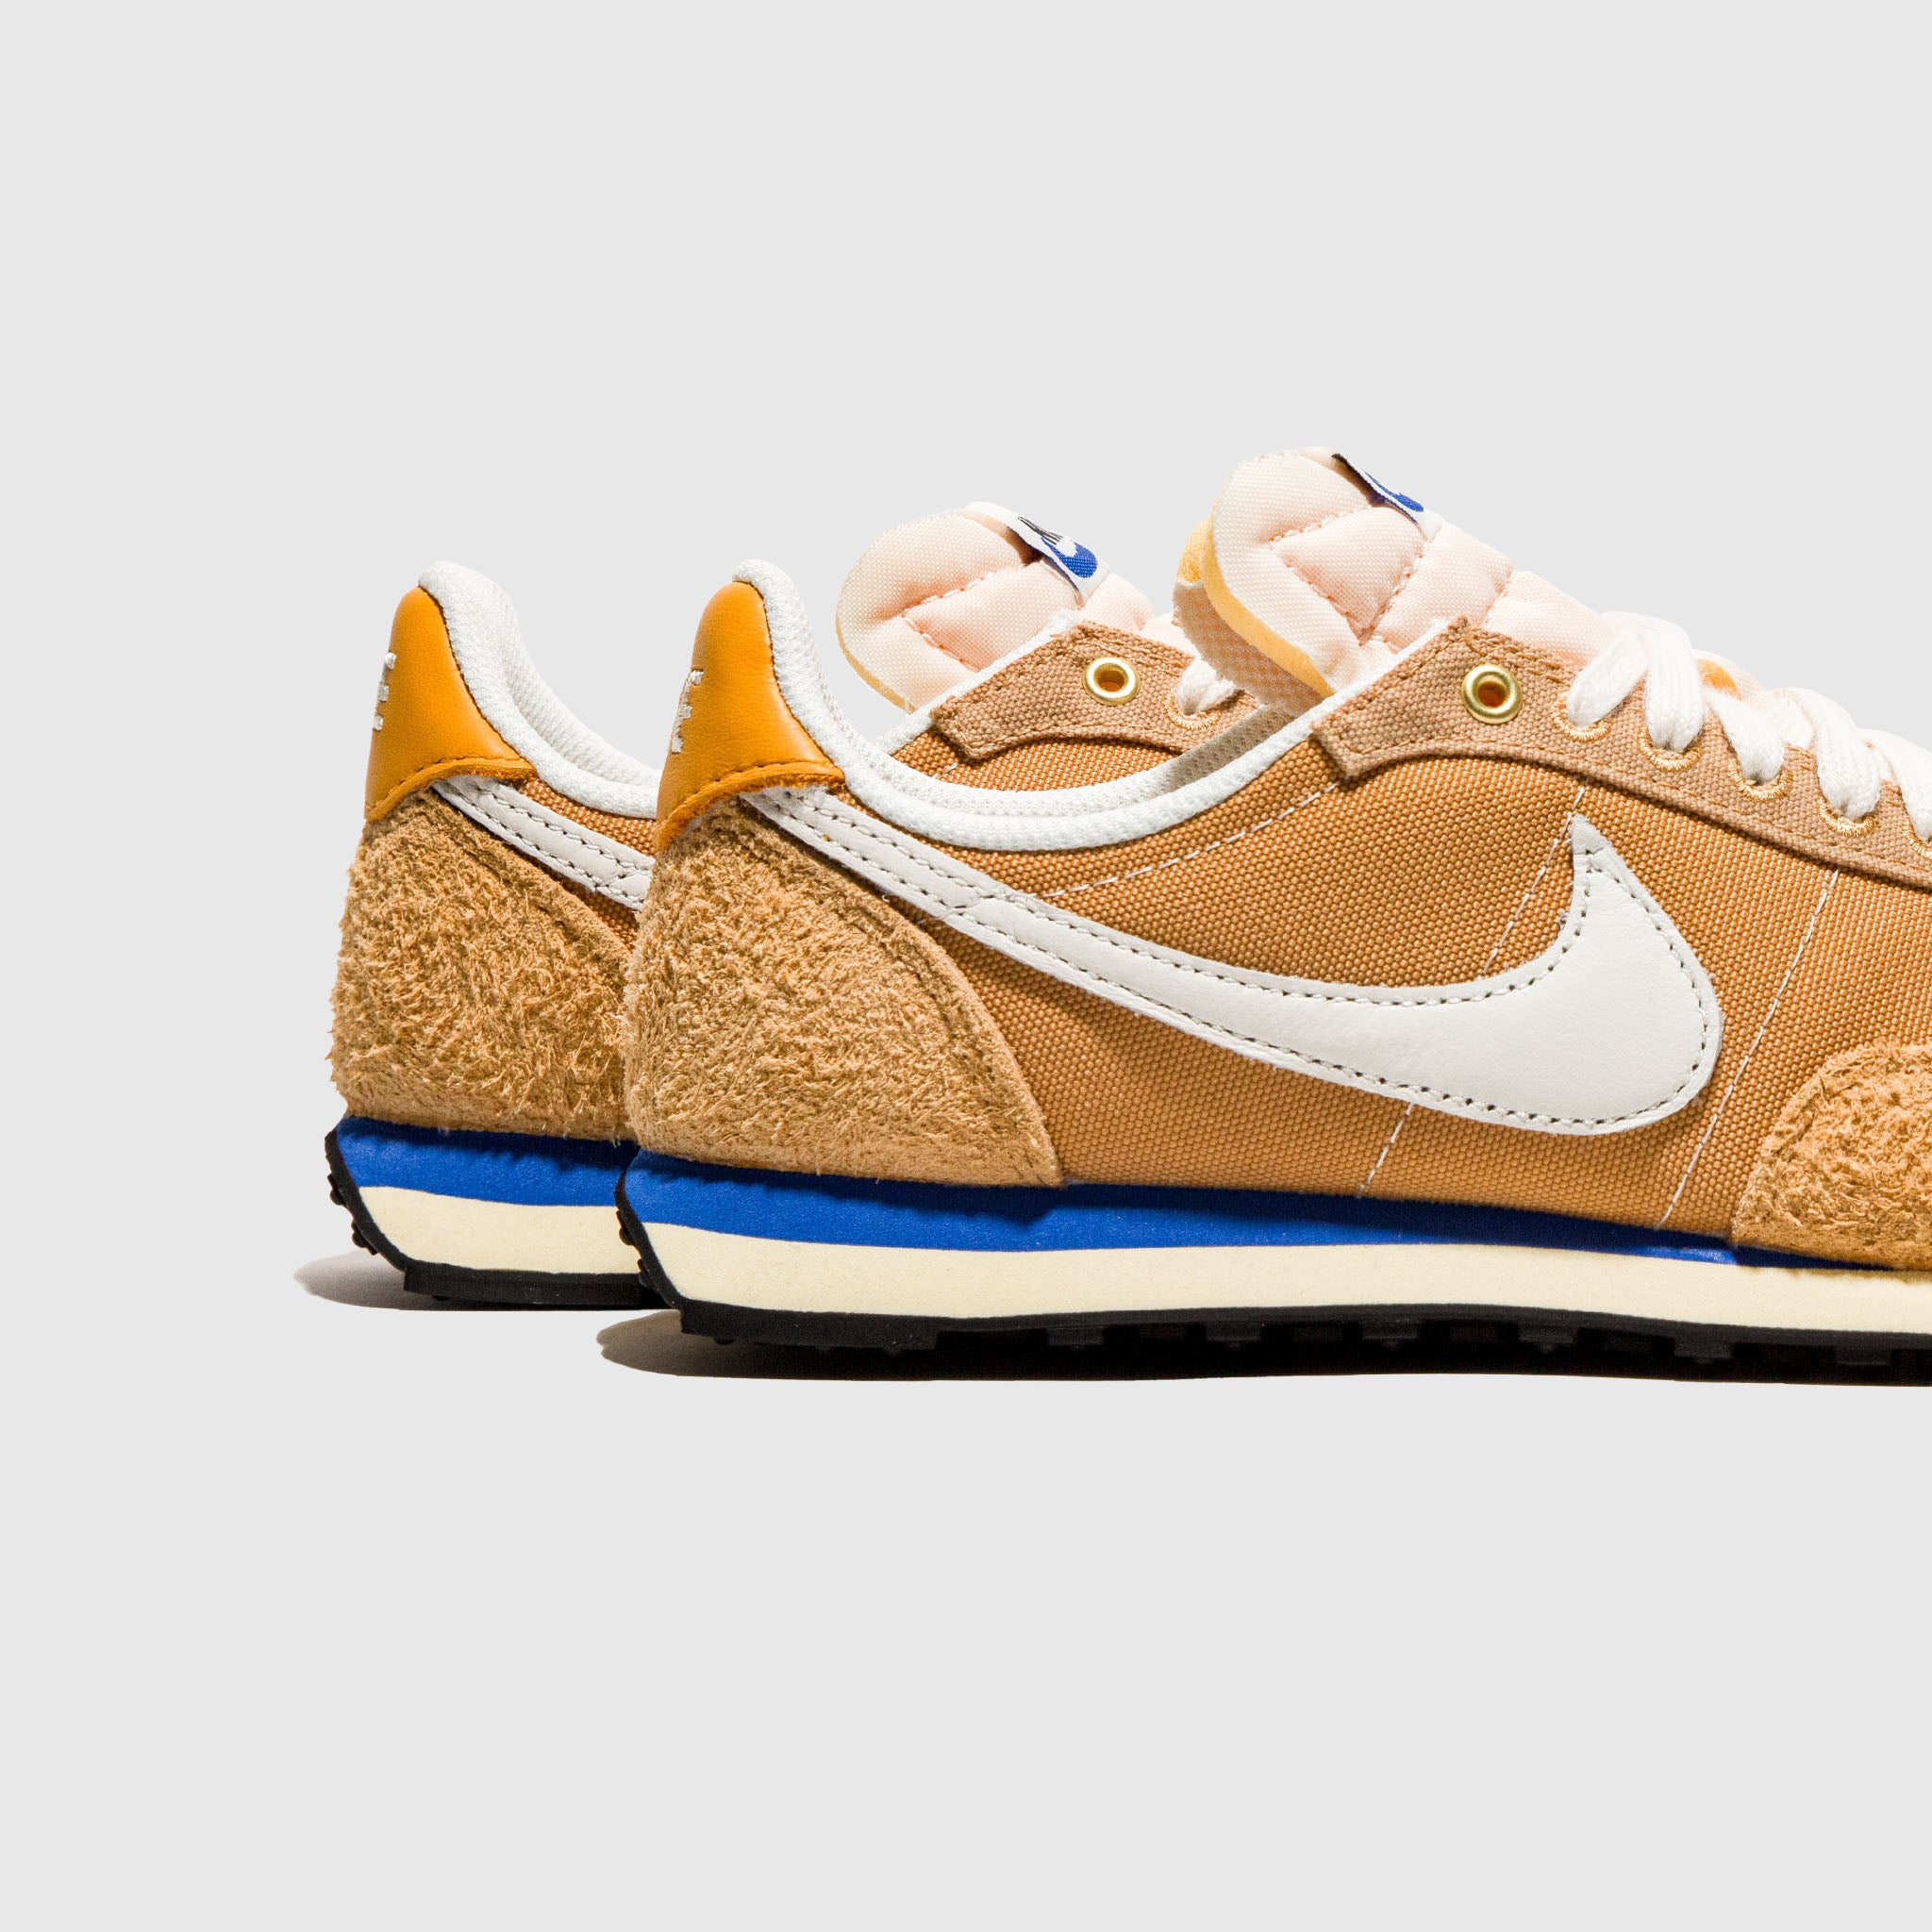 WMNS WAFFLE TRAINER 2 "TWINE"